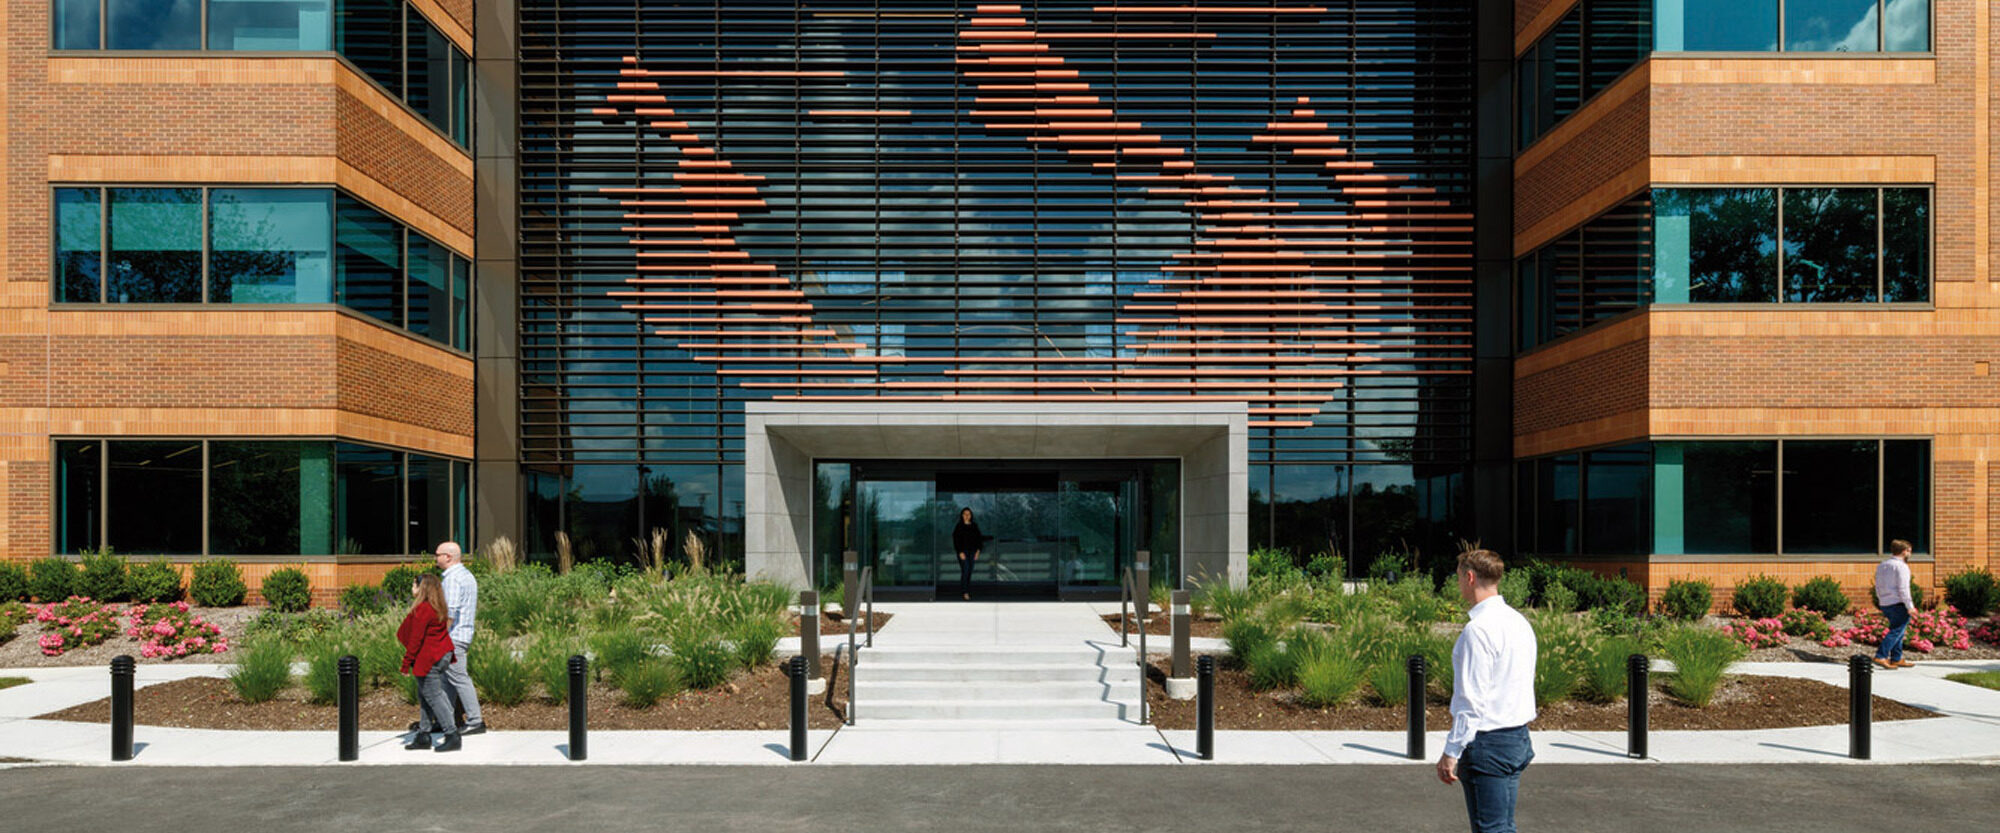 Modern corporate building facade with horizontal copper cladding patterns, flanked by landscaped greenery, with pedestrians approaching a glass entrance.